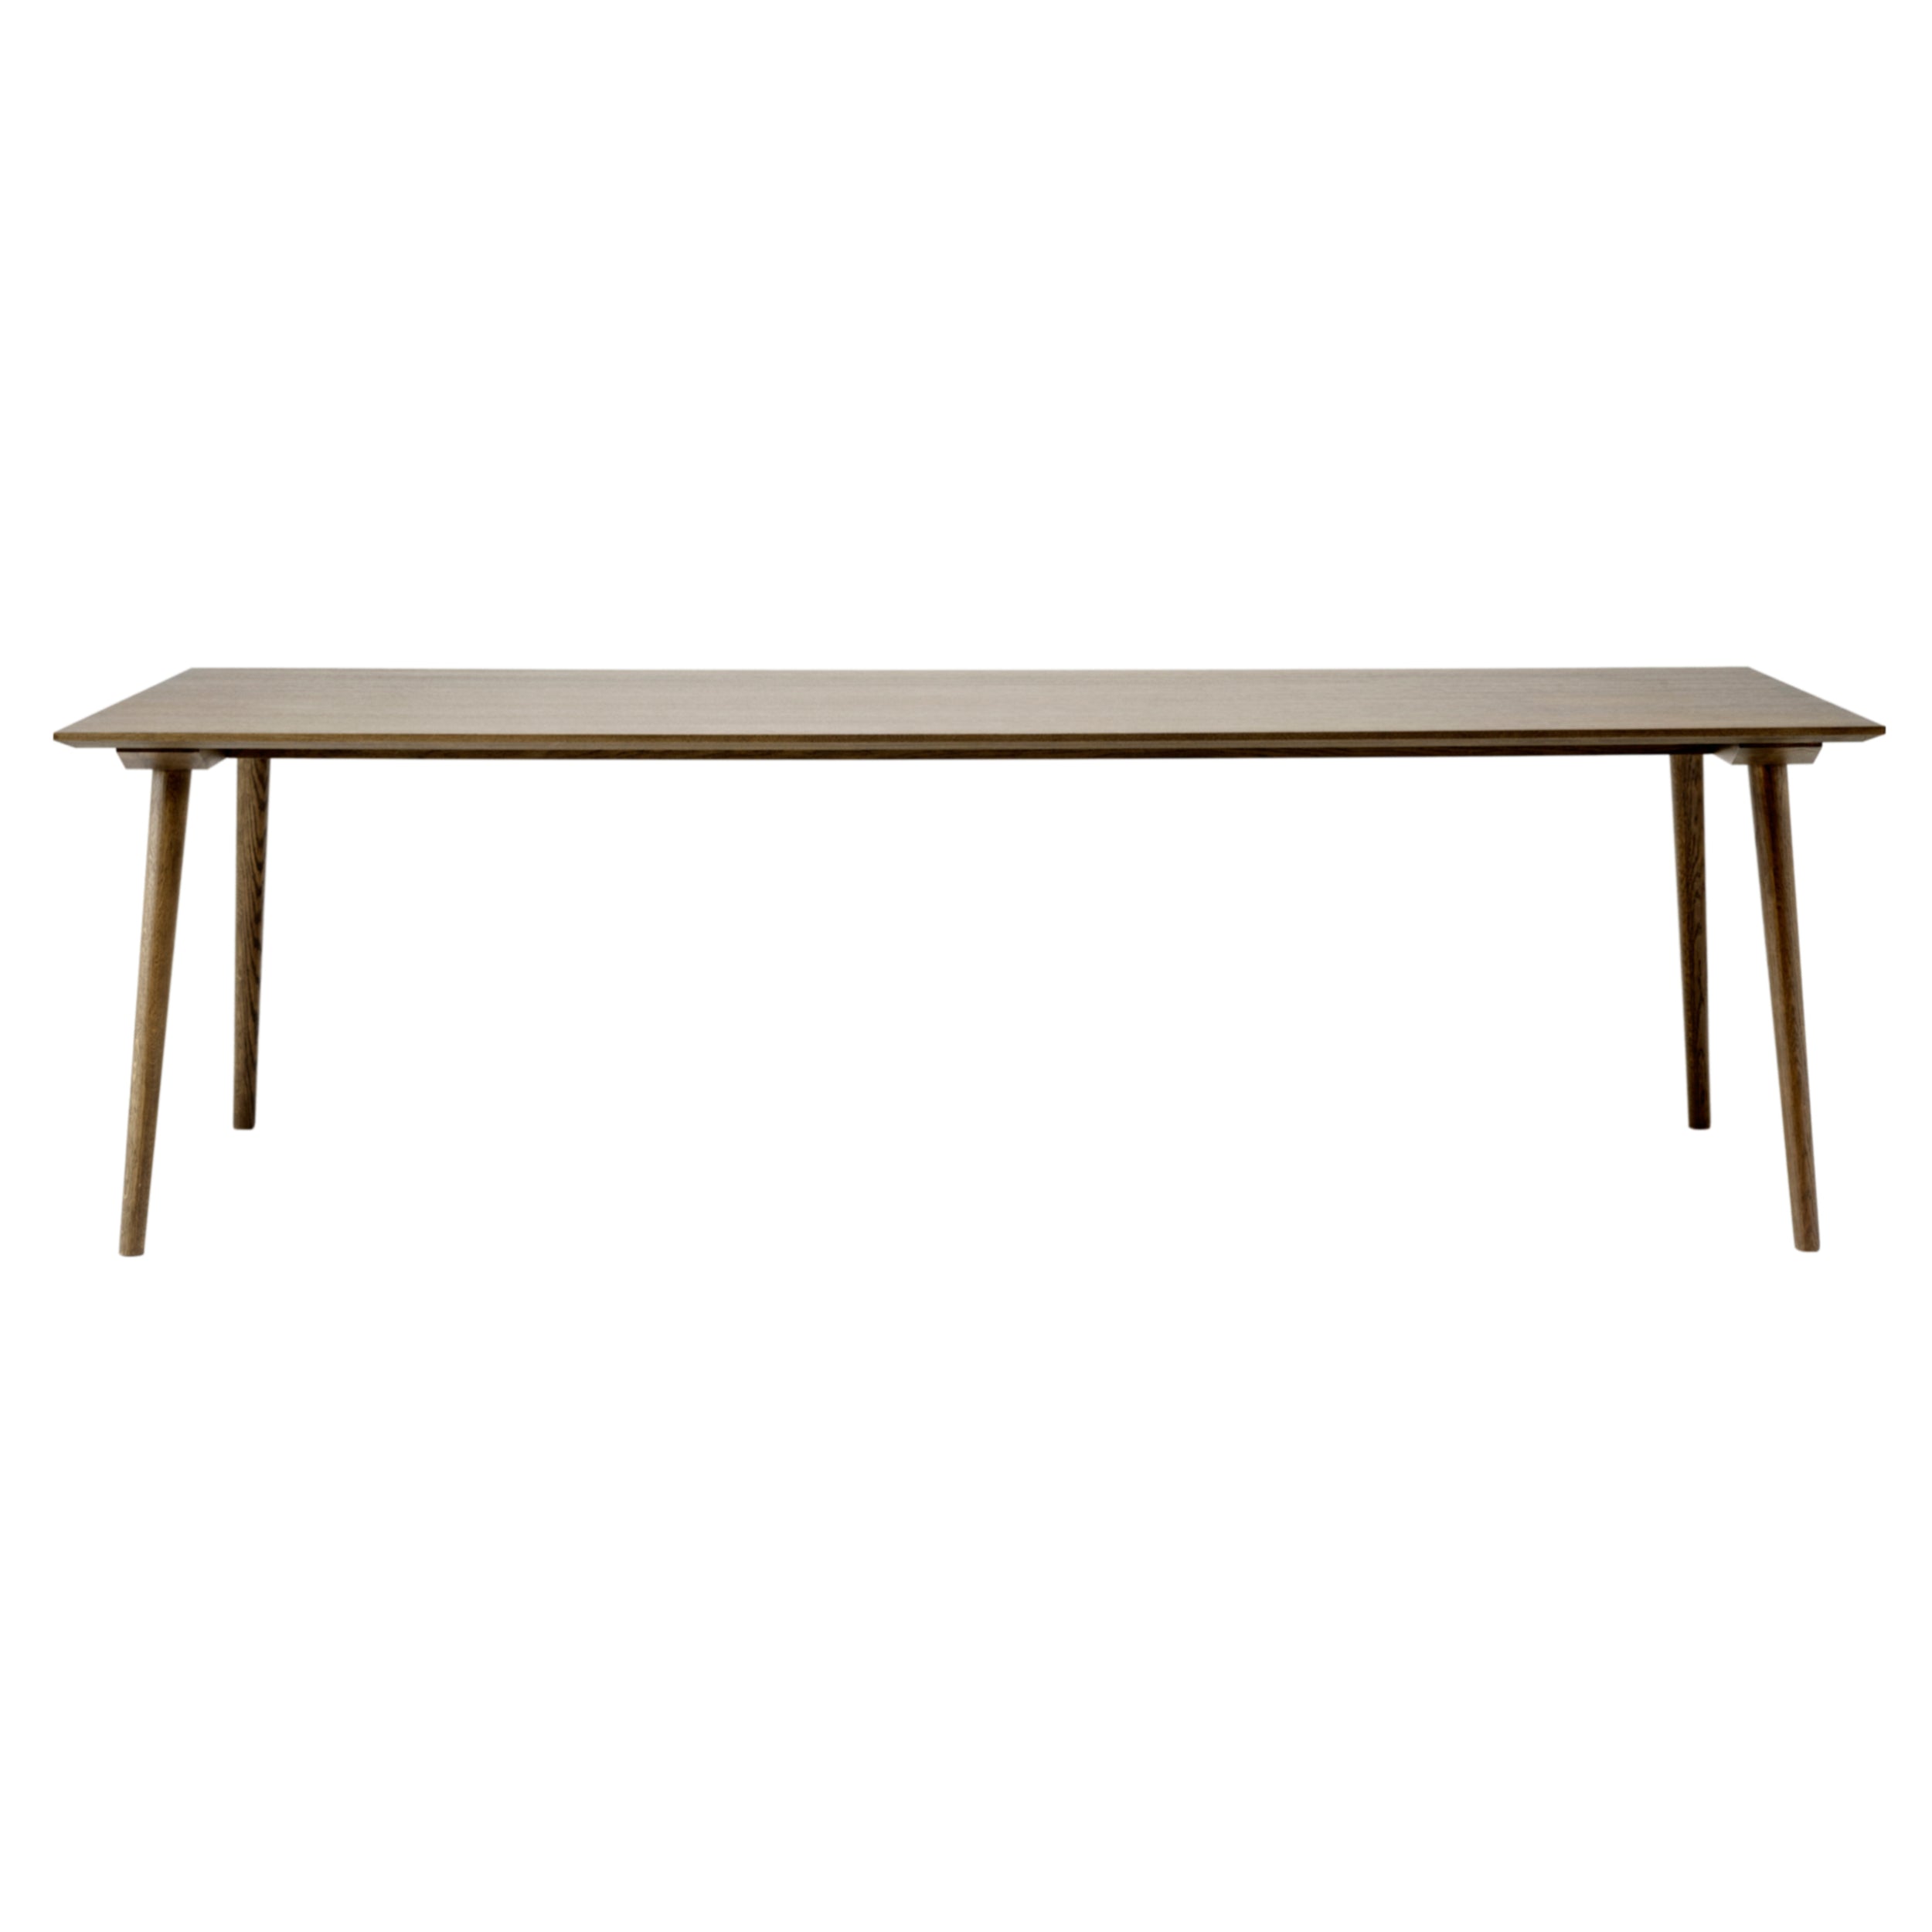 In Between Rectangular Dining Table SK5 + SK6: Large (SK6) - 98.4